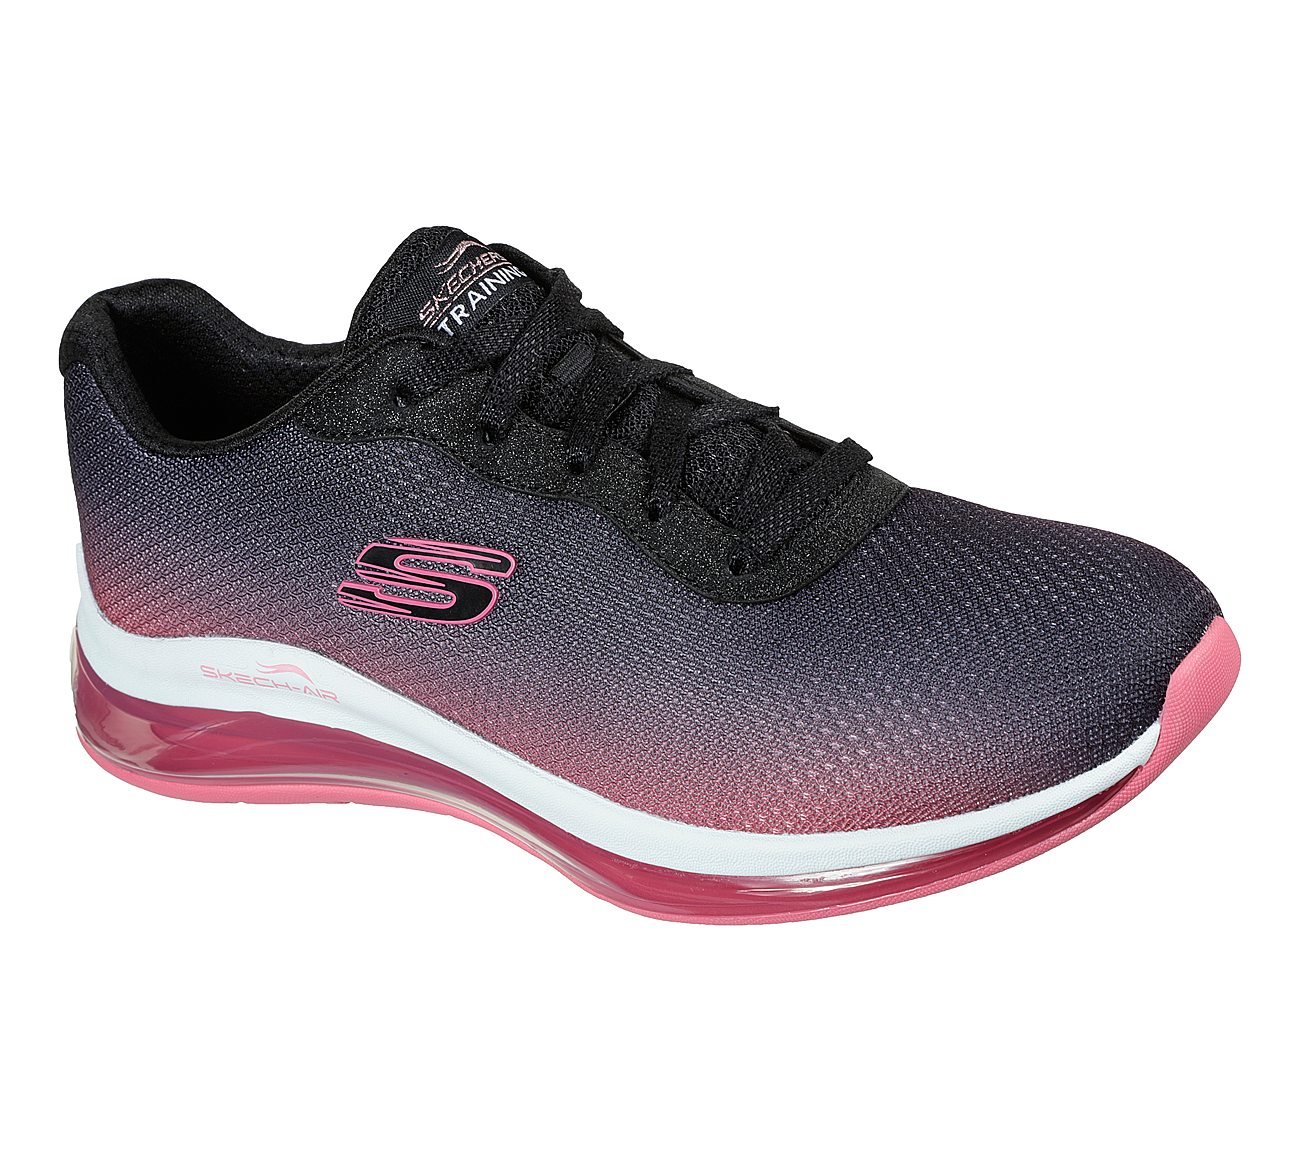 SKECH-AIR ELEMENT 2, BLACK/HOT PINK Footwear Right View